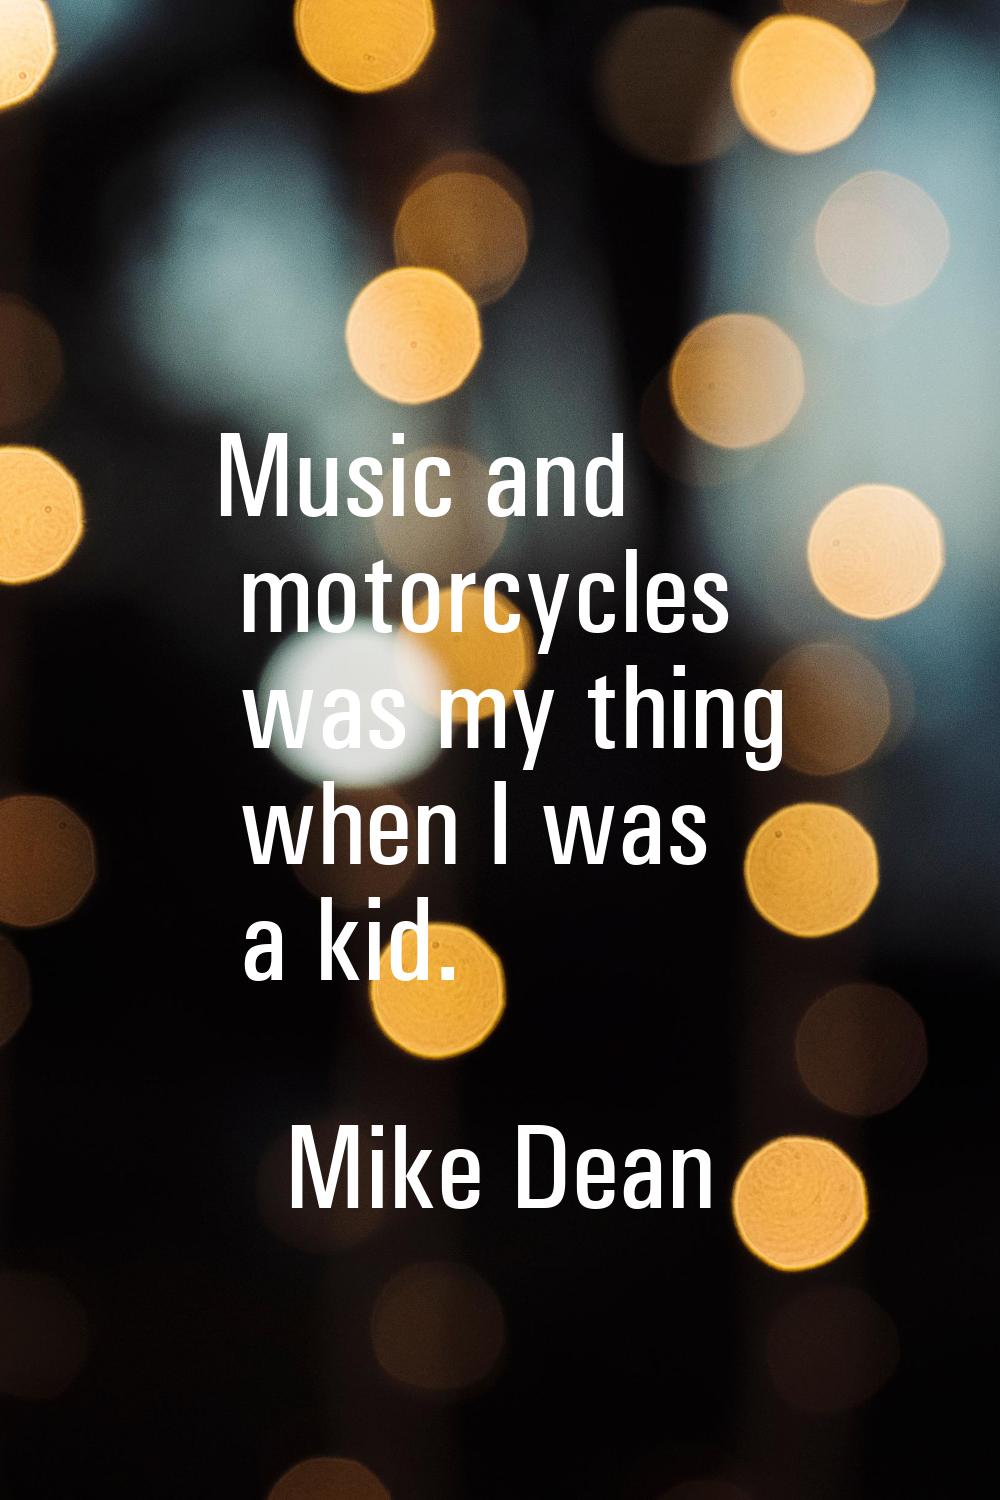 Music and motorcycles was my thing when I was a kid.